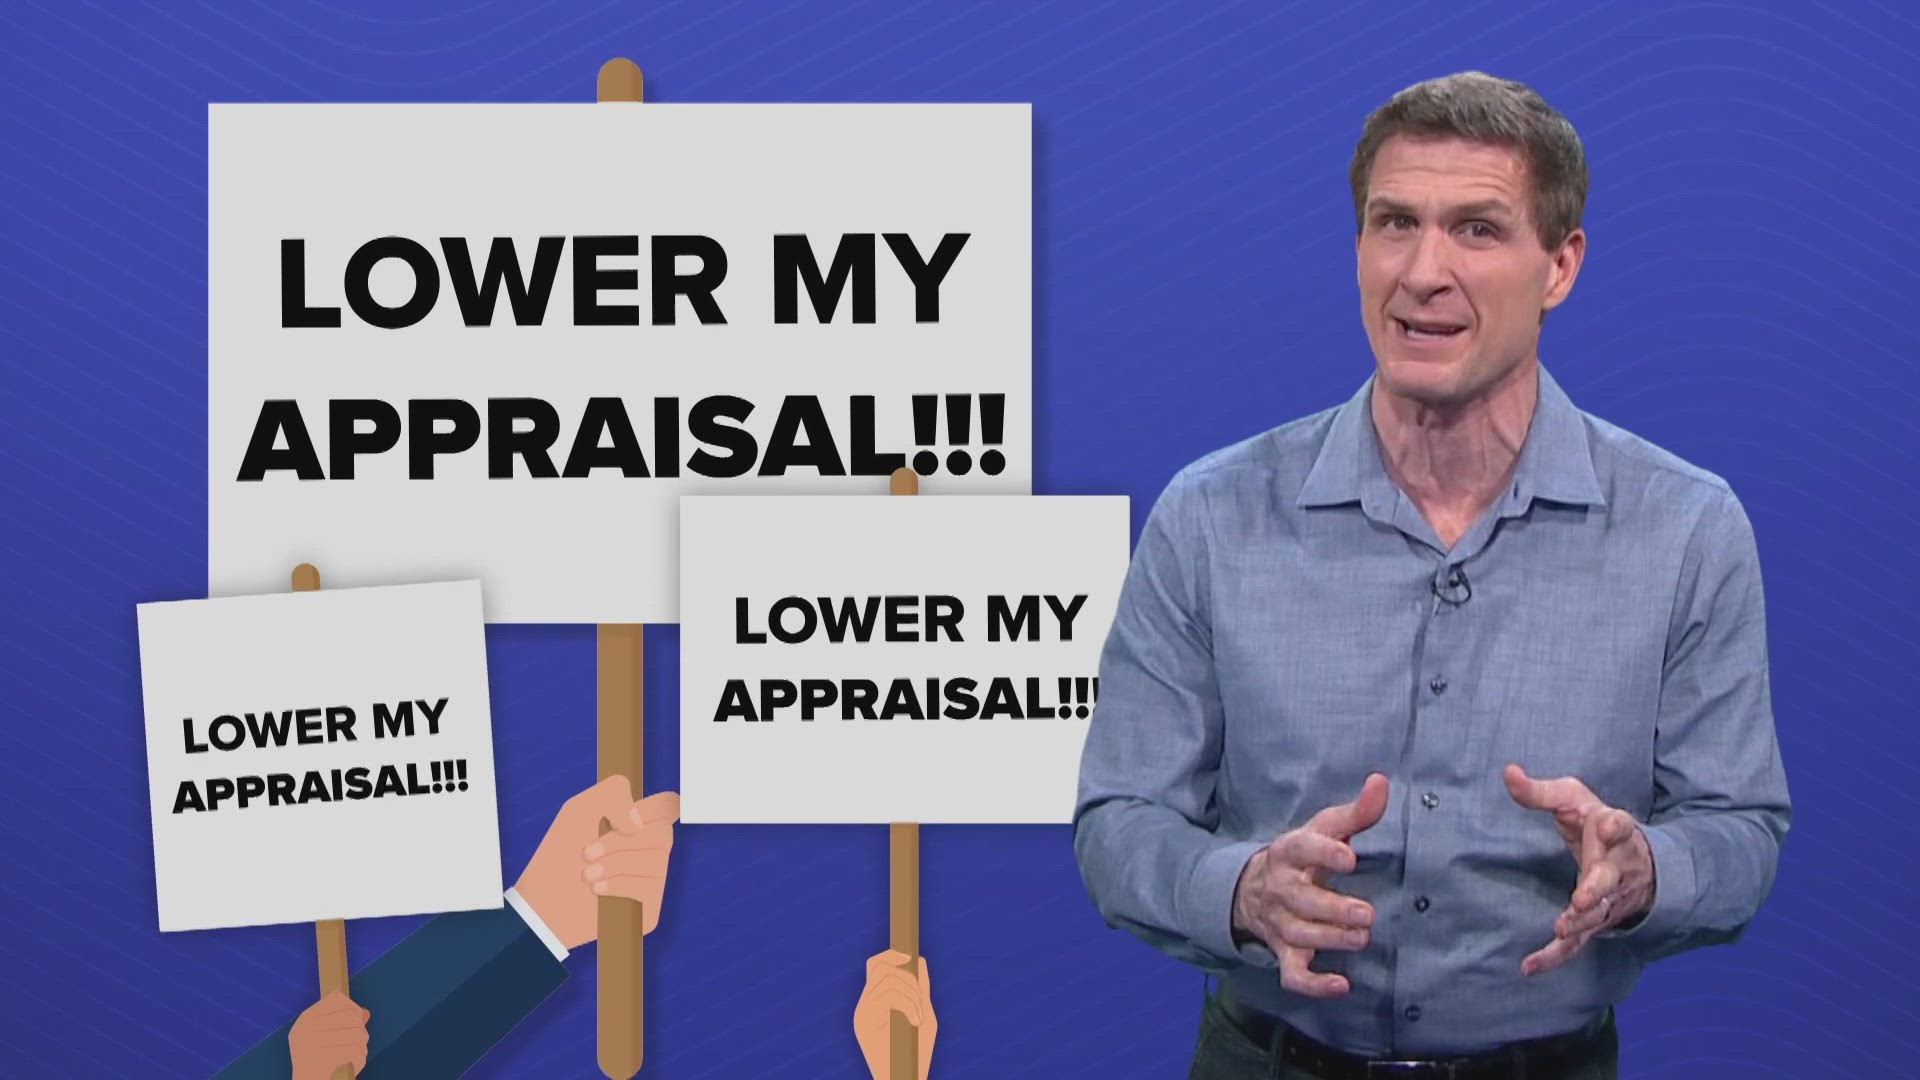 Let's look at the process of protesting your appraisals.